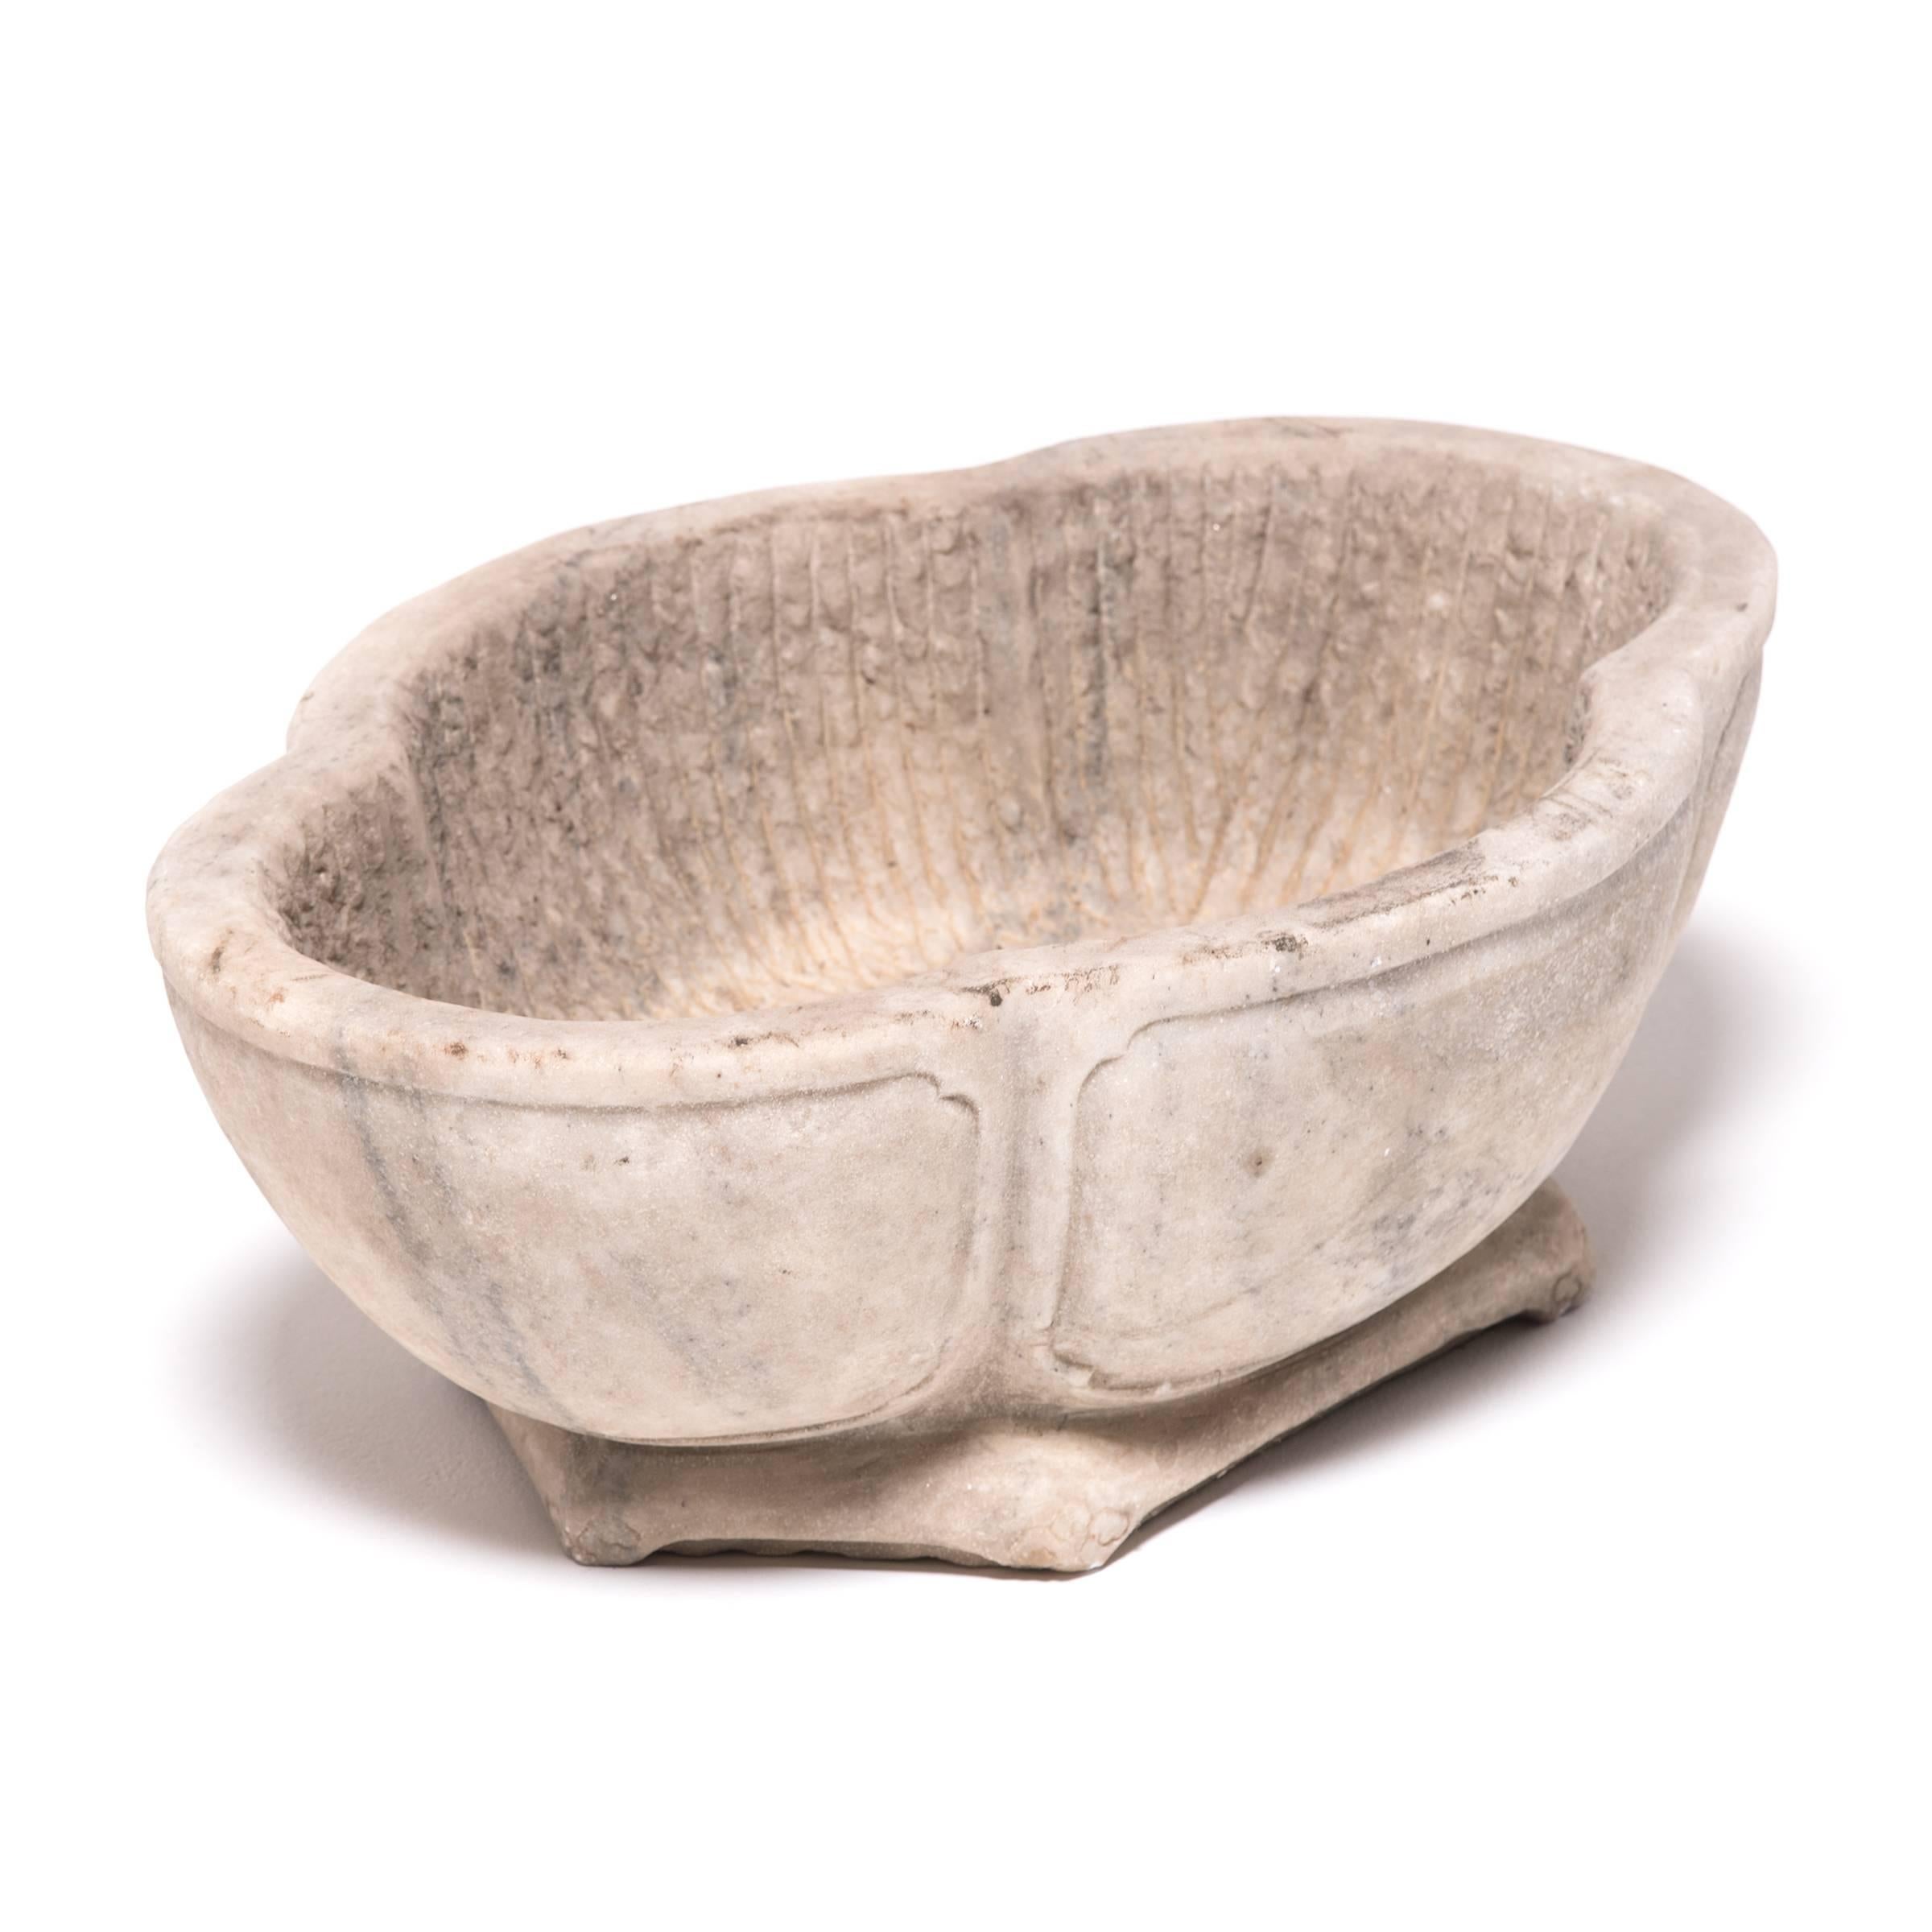 Shaped in a quatrefoil shape similar to that of a clove bud or common clover, this grey marble basin from Shanxi province has a graceful, low profile. Also suggestive of lotus blossom, a Buddhist symbol for purity, the shape of the basin feels right